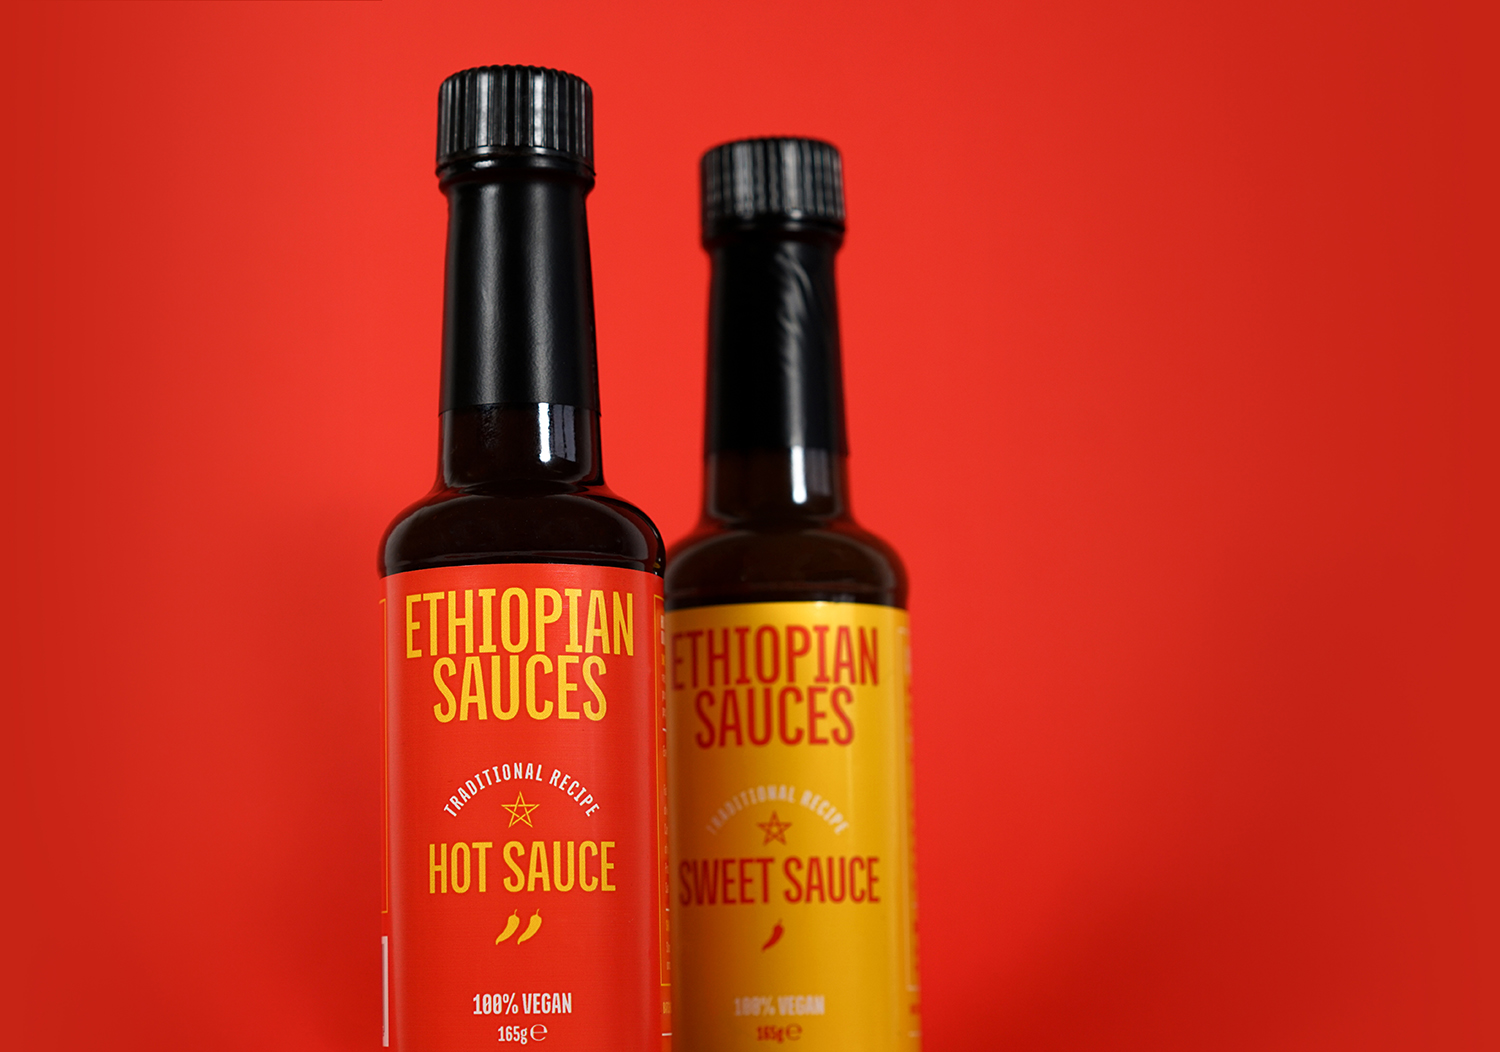 Hot brand identity for saucy startup